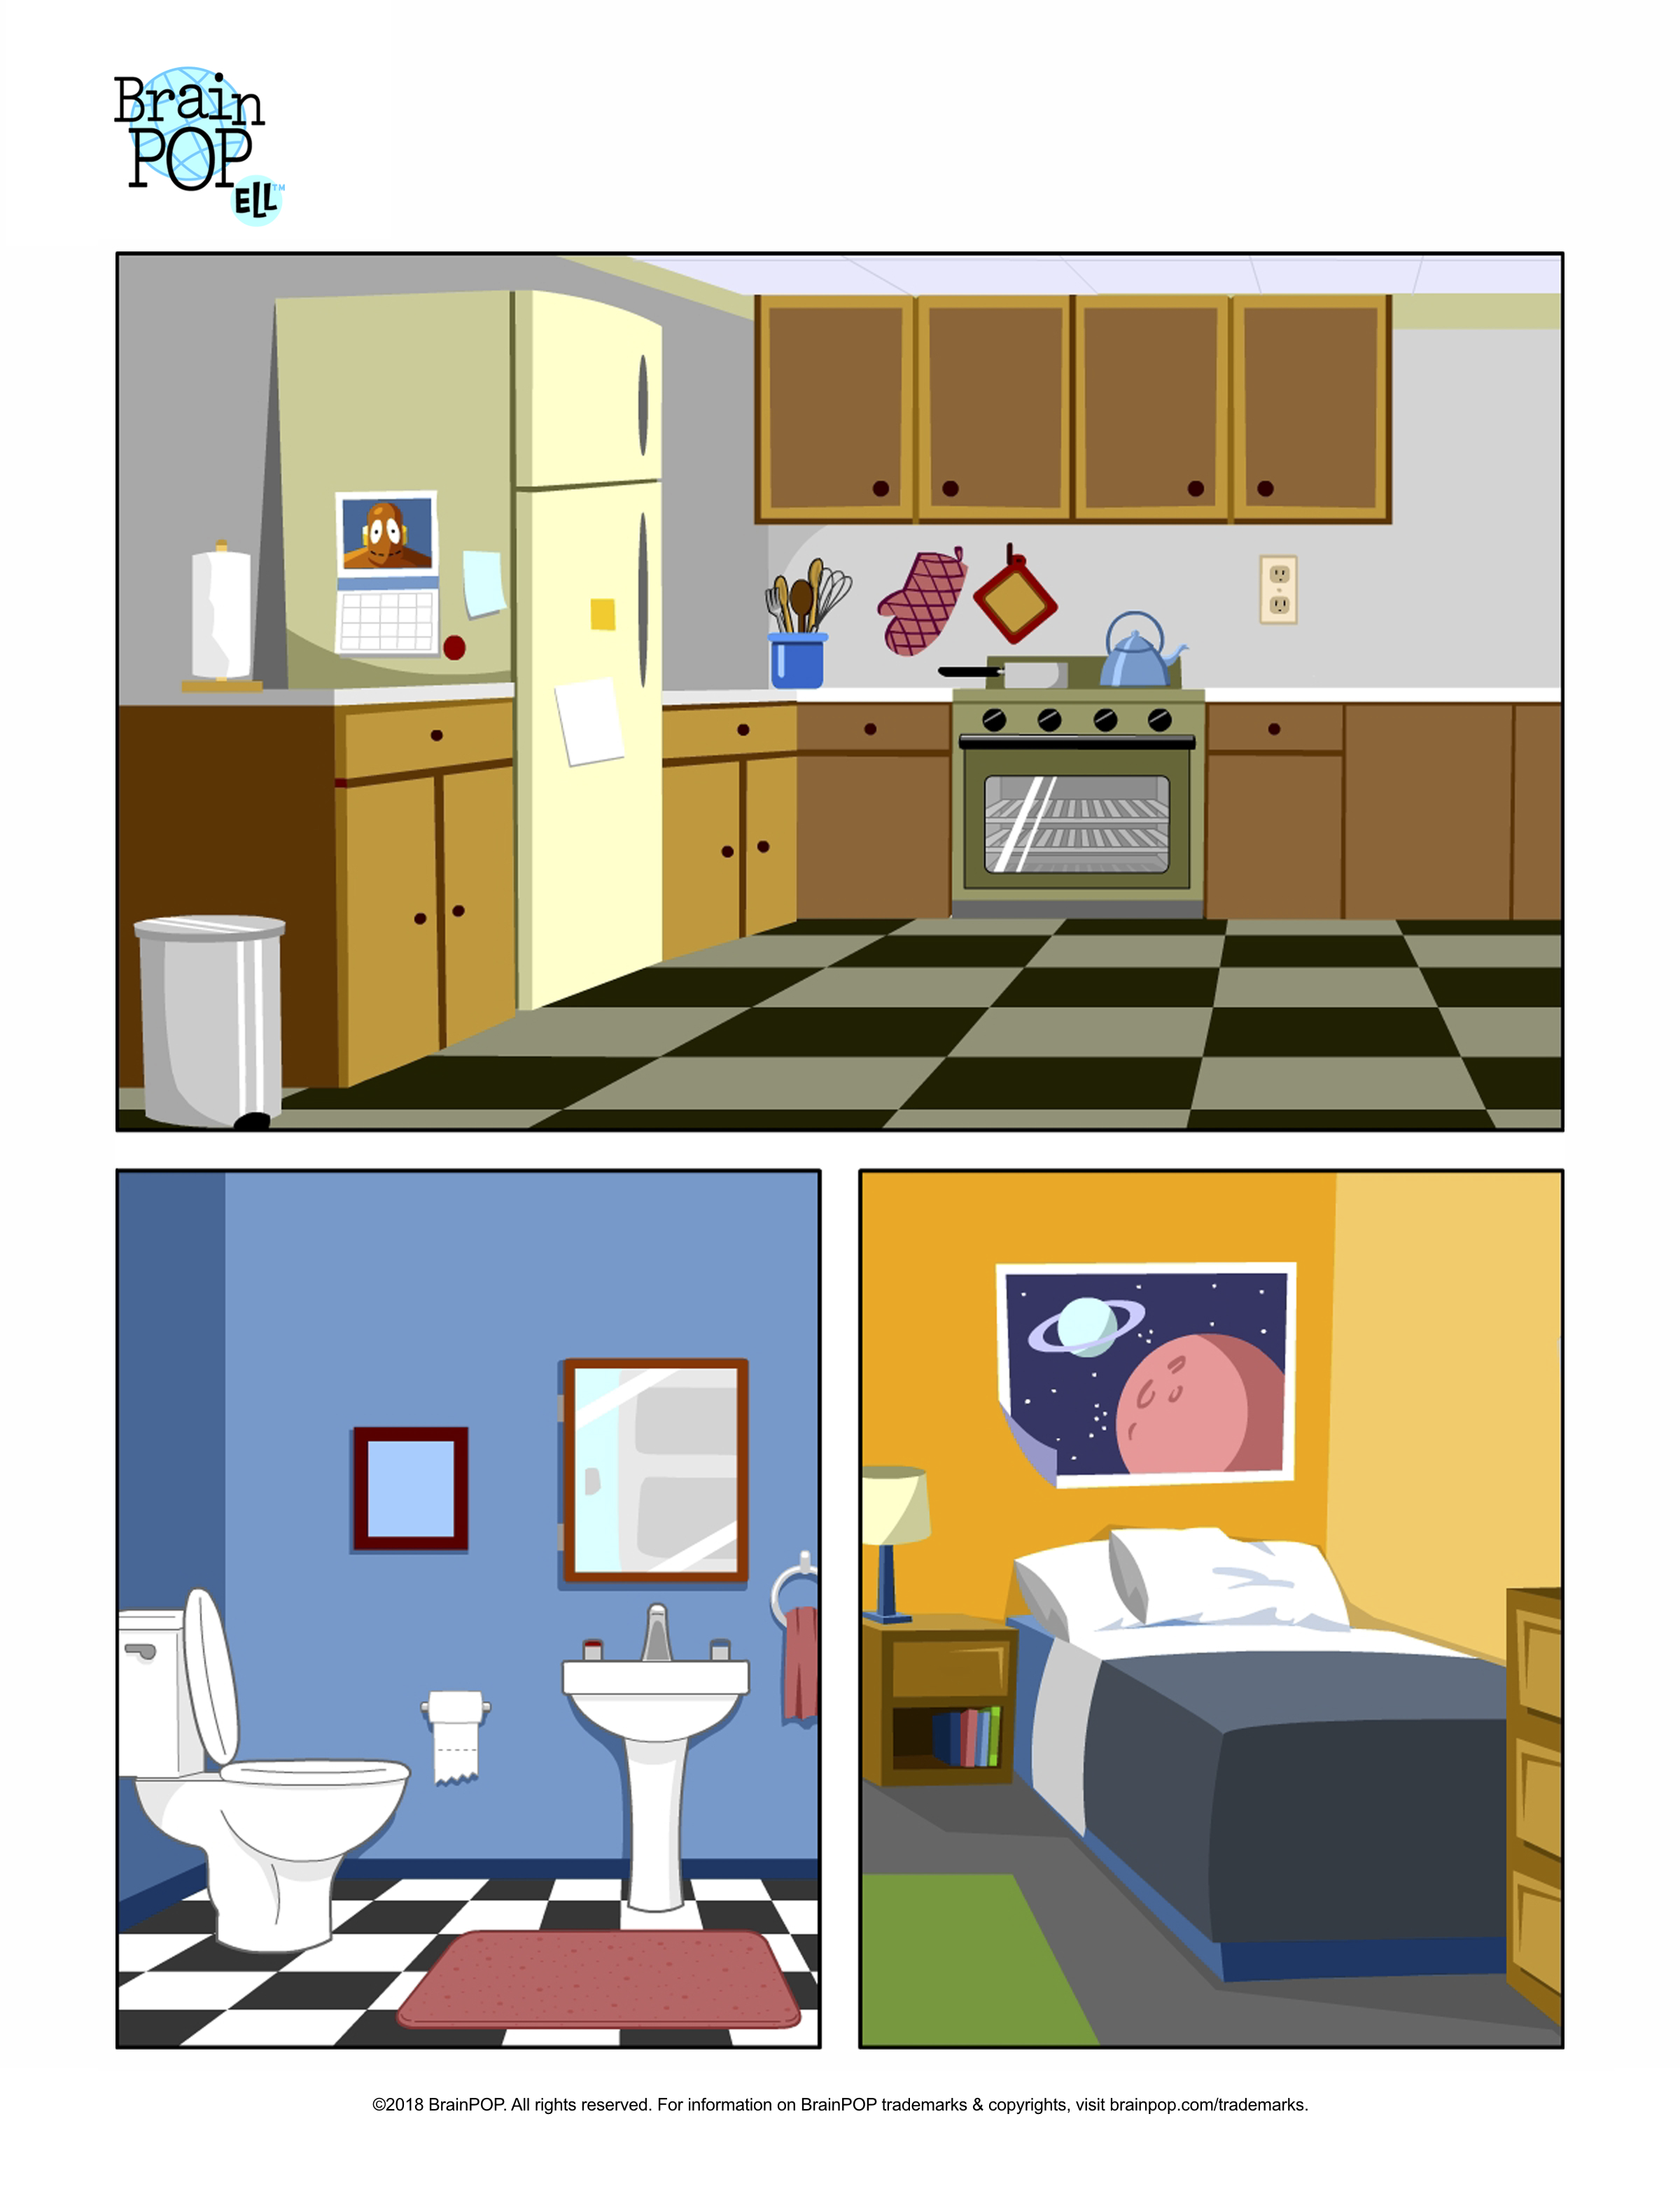 Rooms in the House Image